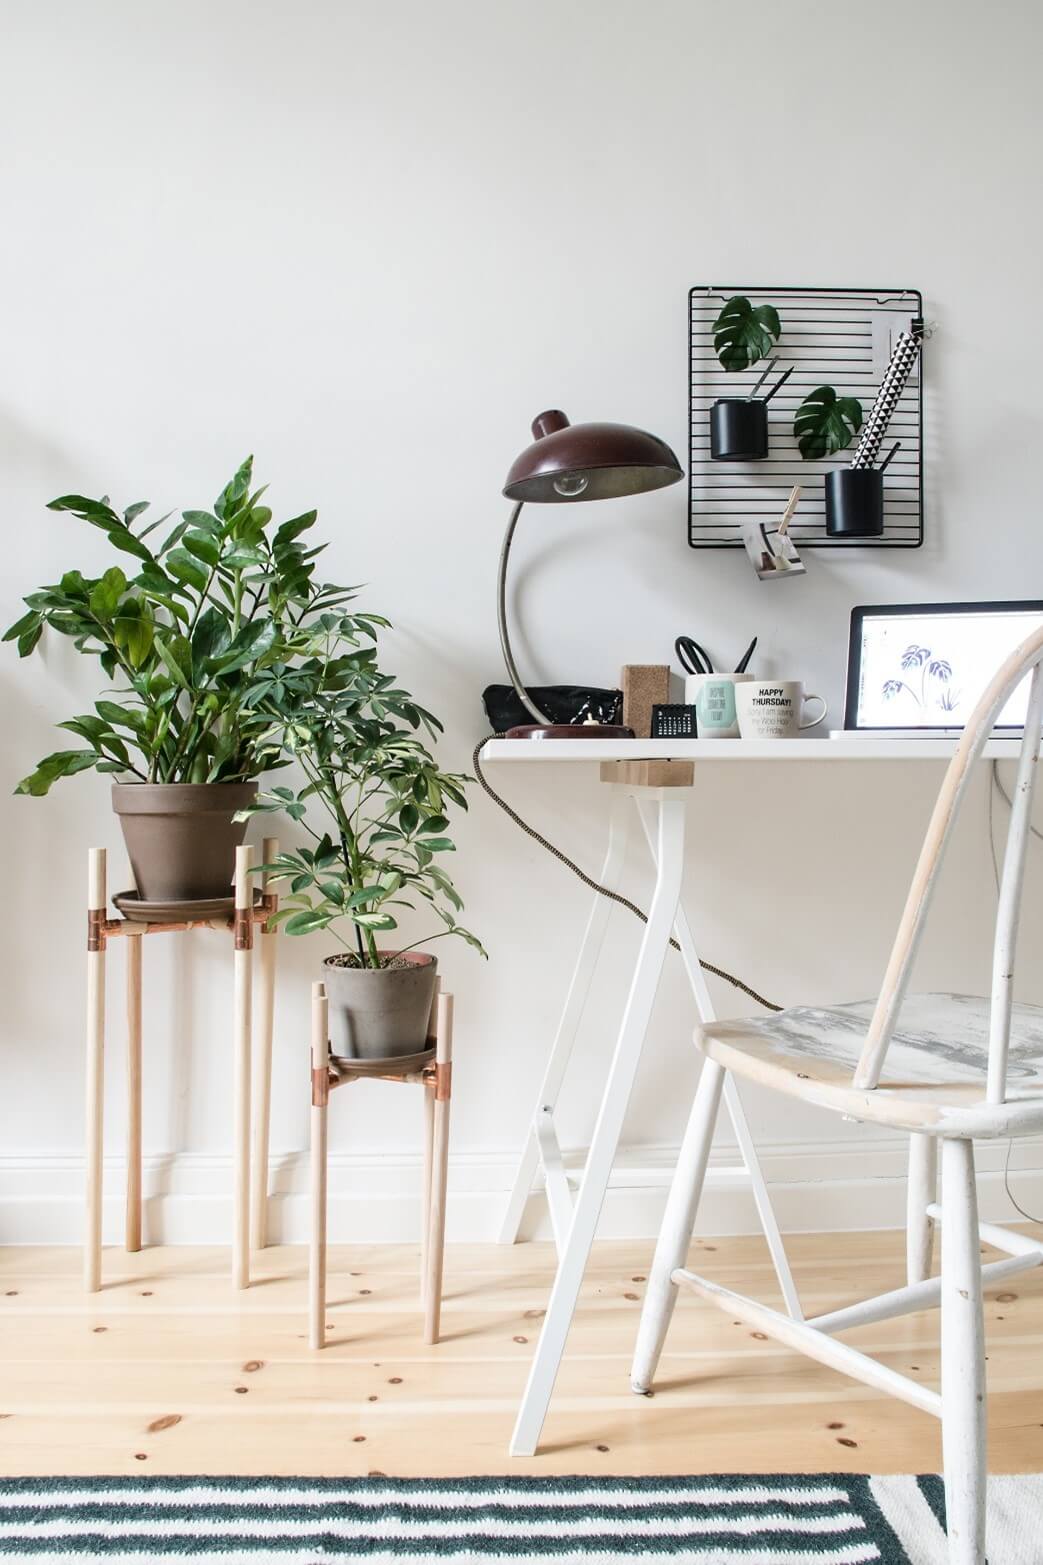 Work from home desk décor